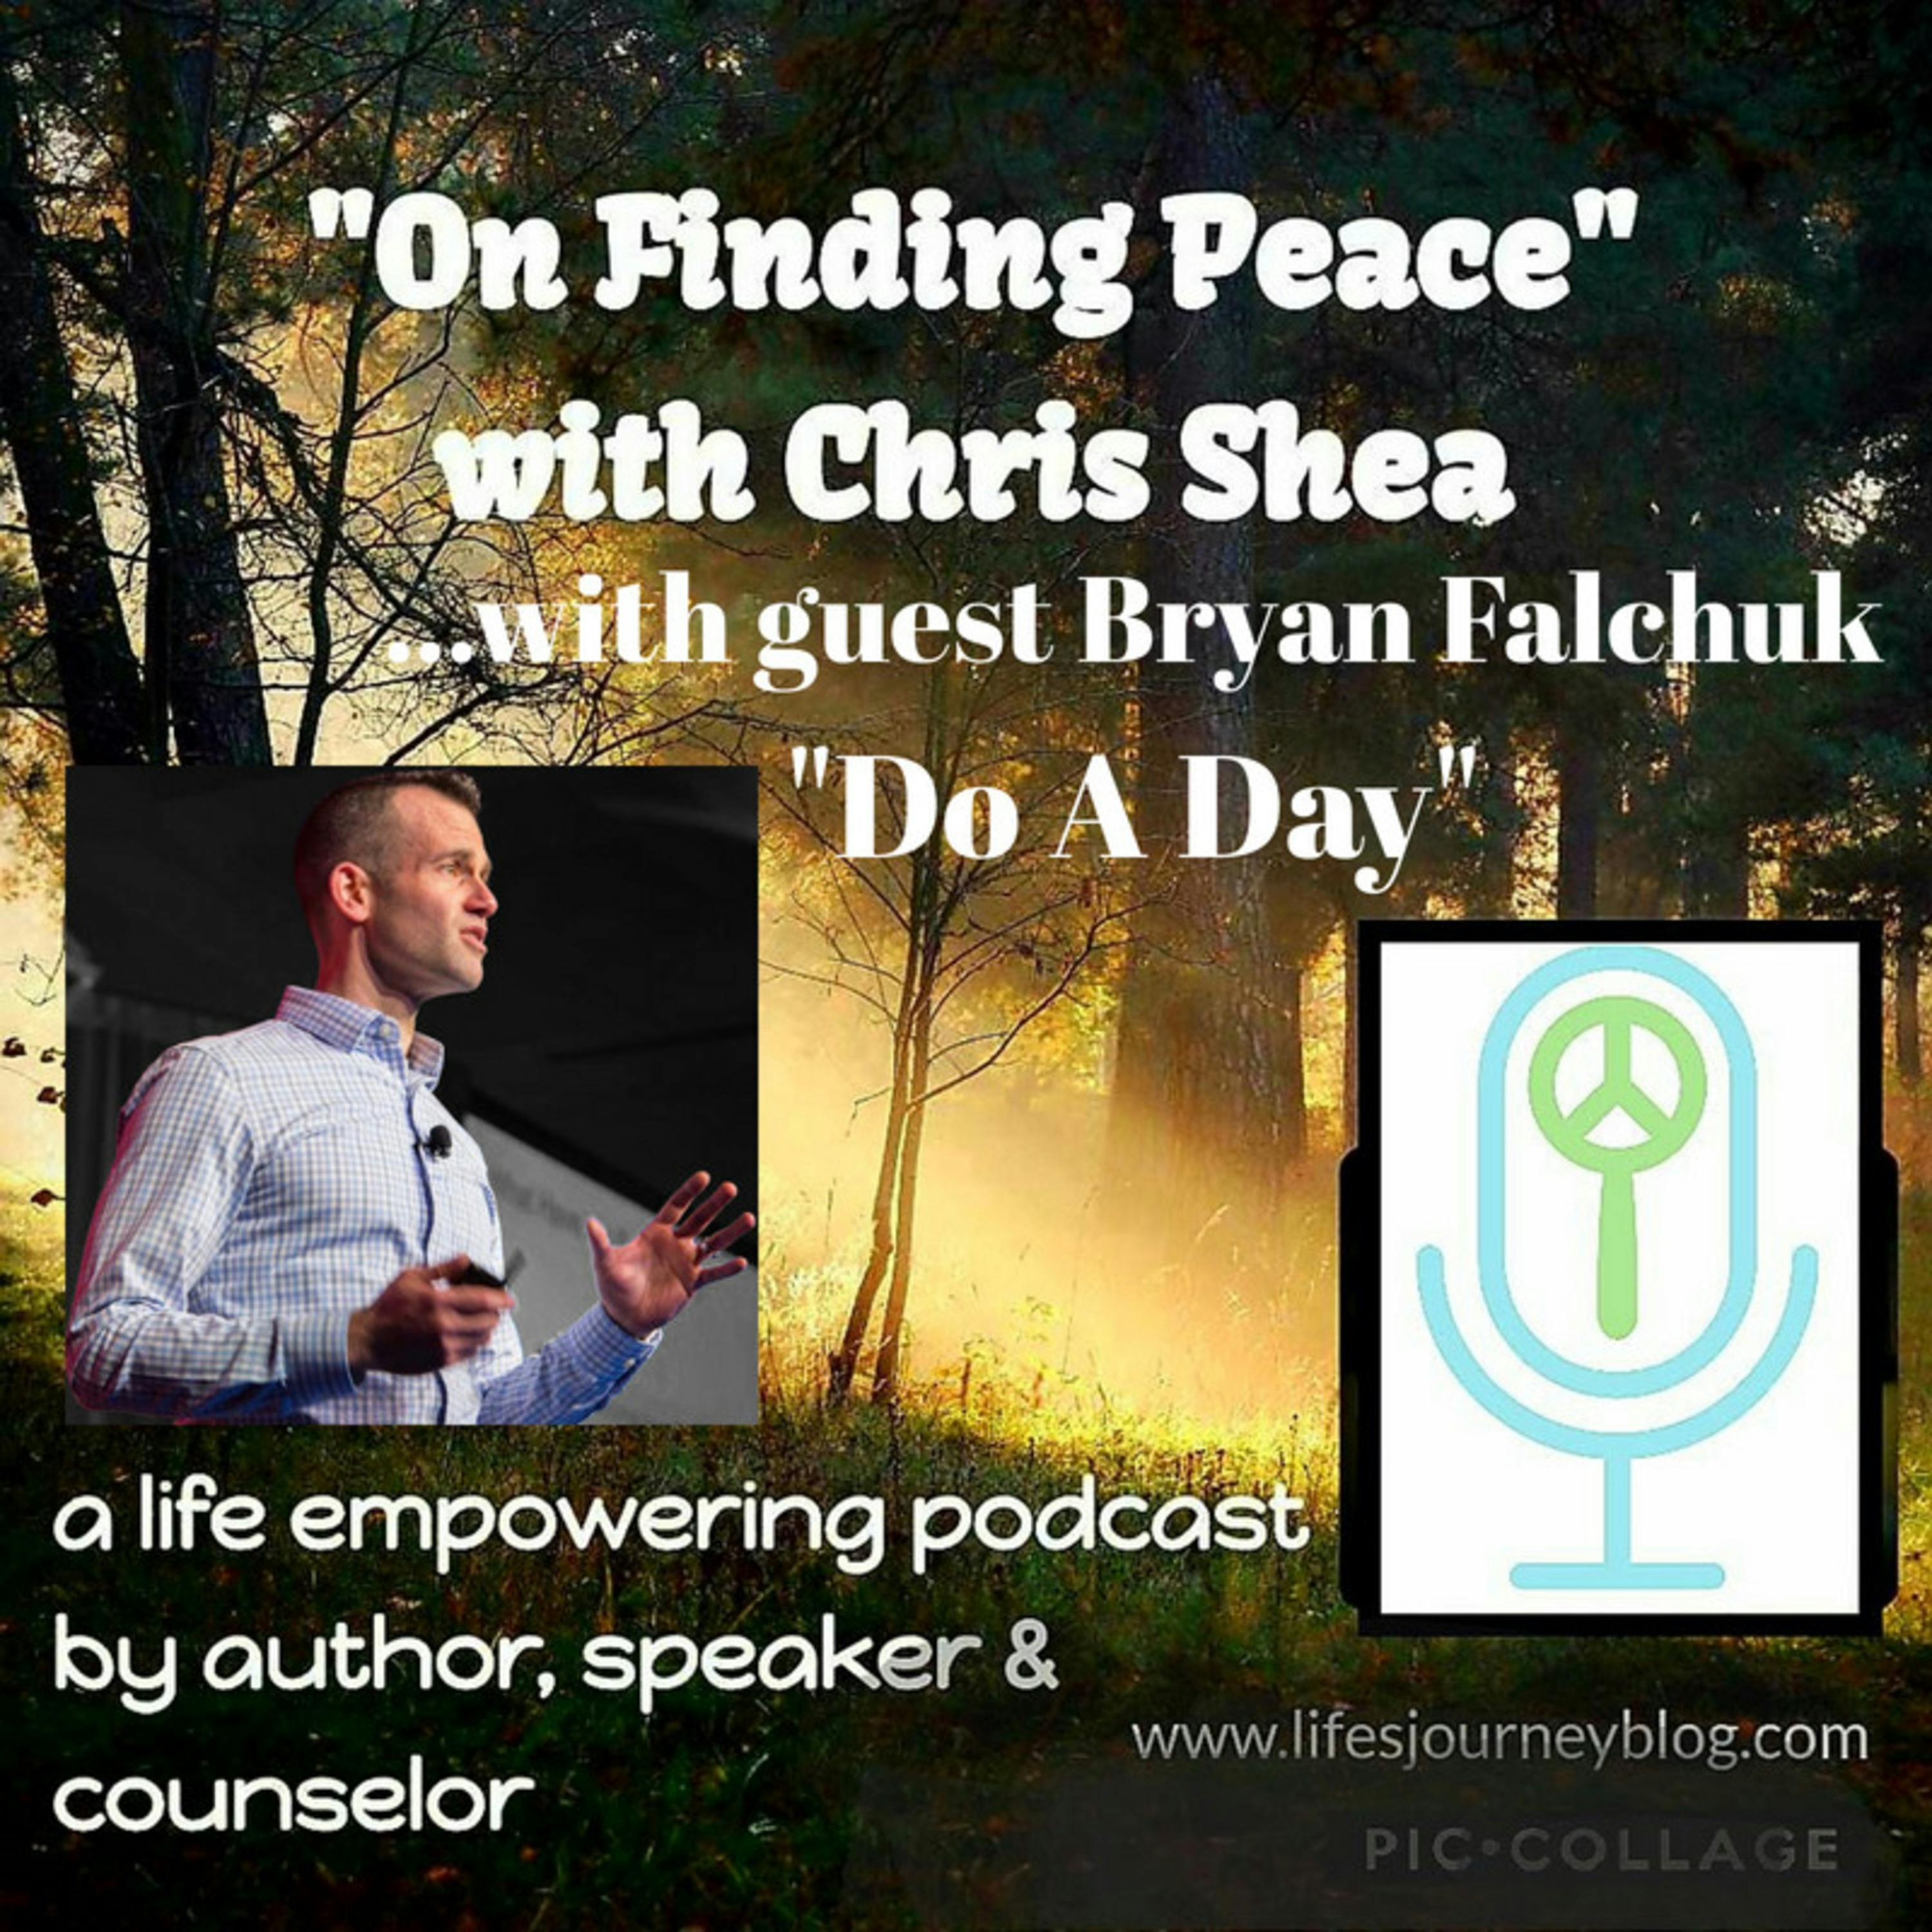 Do A Day - interview with Bryan Falchuk